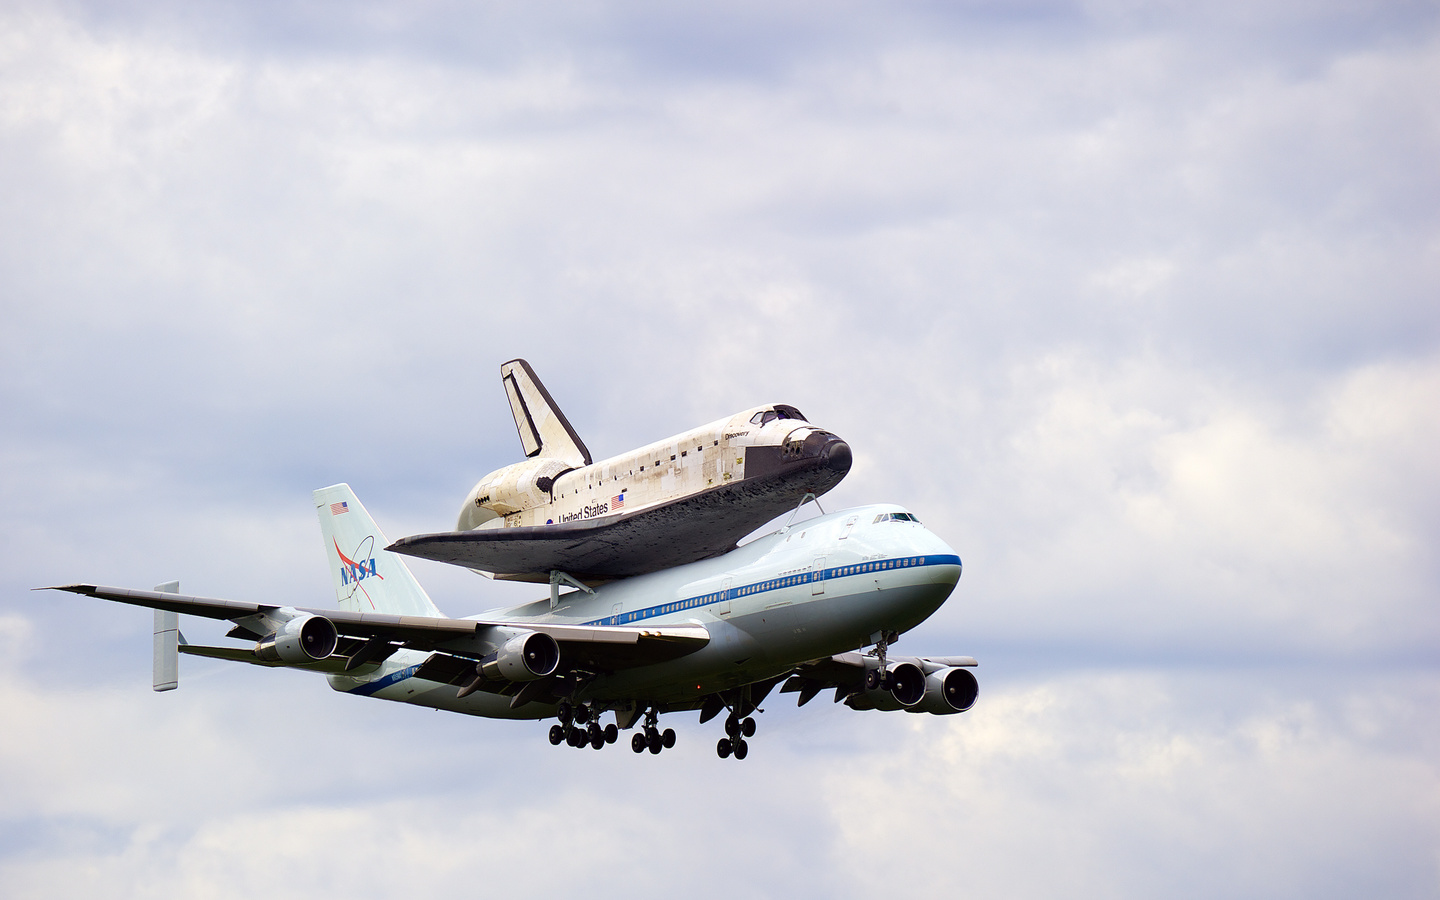 , , boeing 747-100, Space shuttle discovery, , , nasa